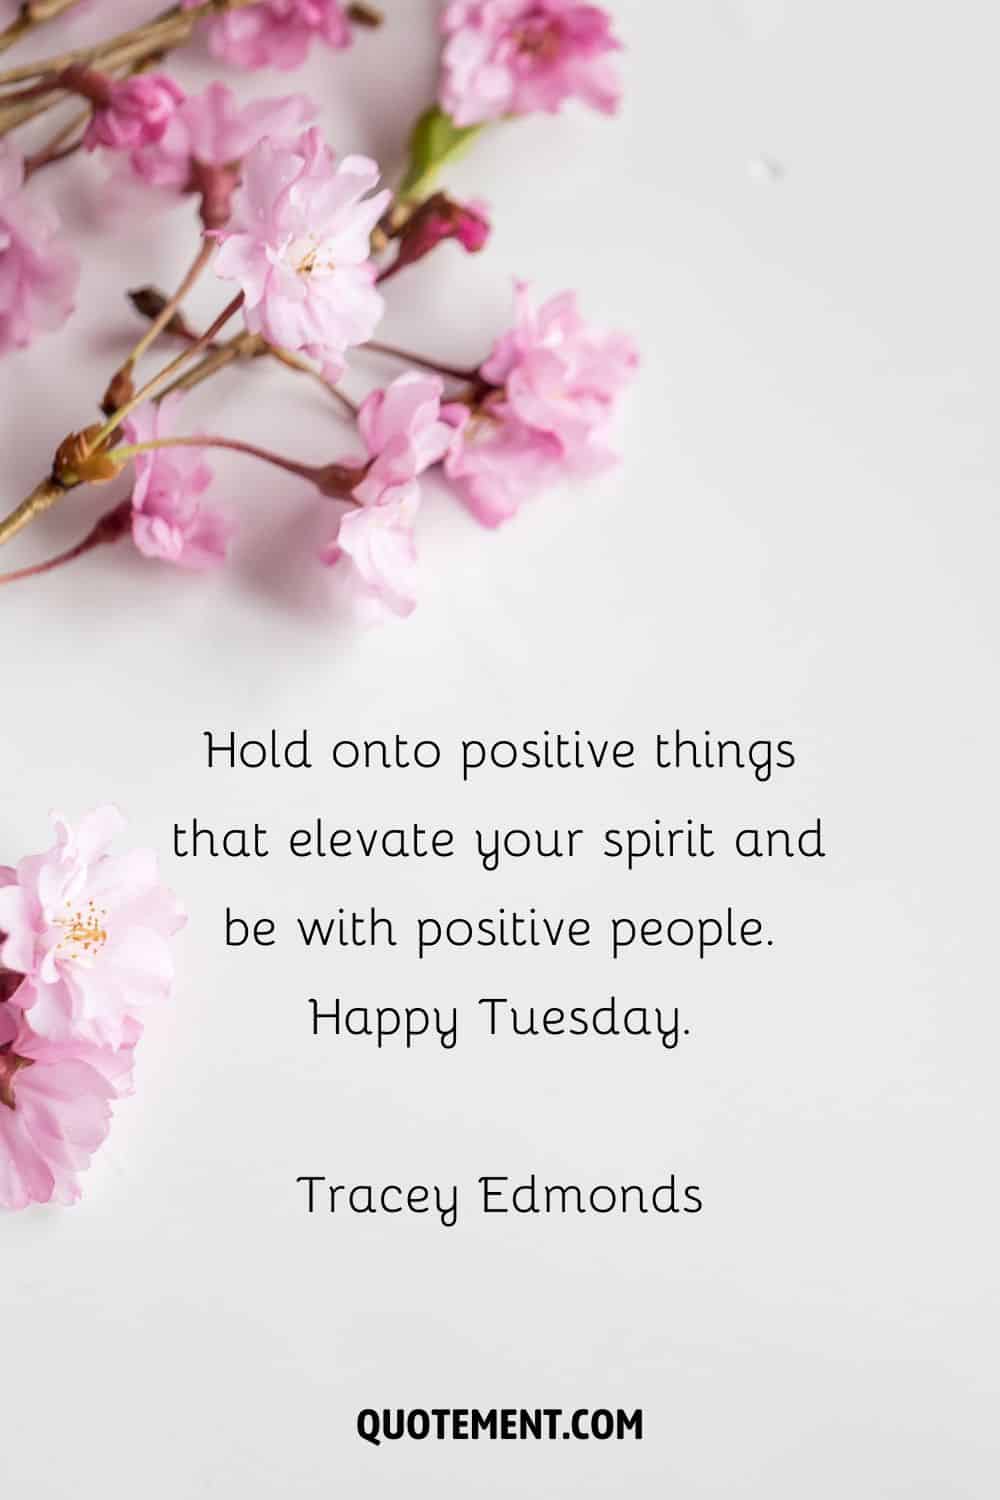 “Hold onto positive things that elevate your spirit and be with positive people. Happy Tuesday.” — Tracey Edmonds